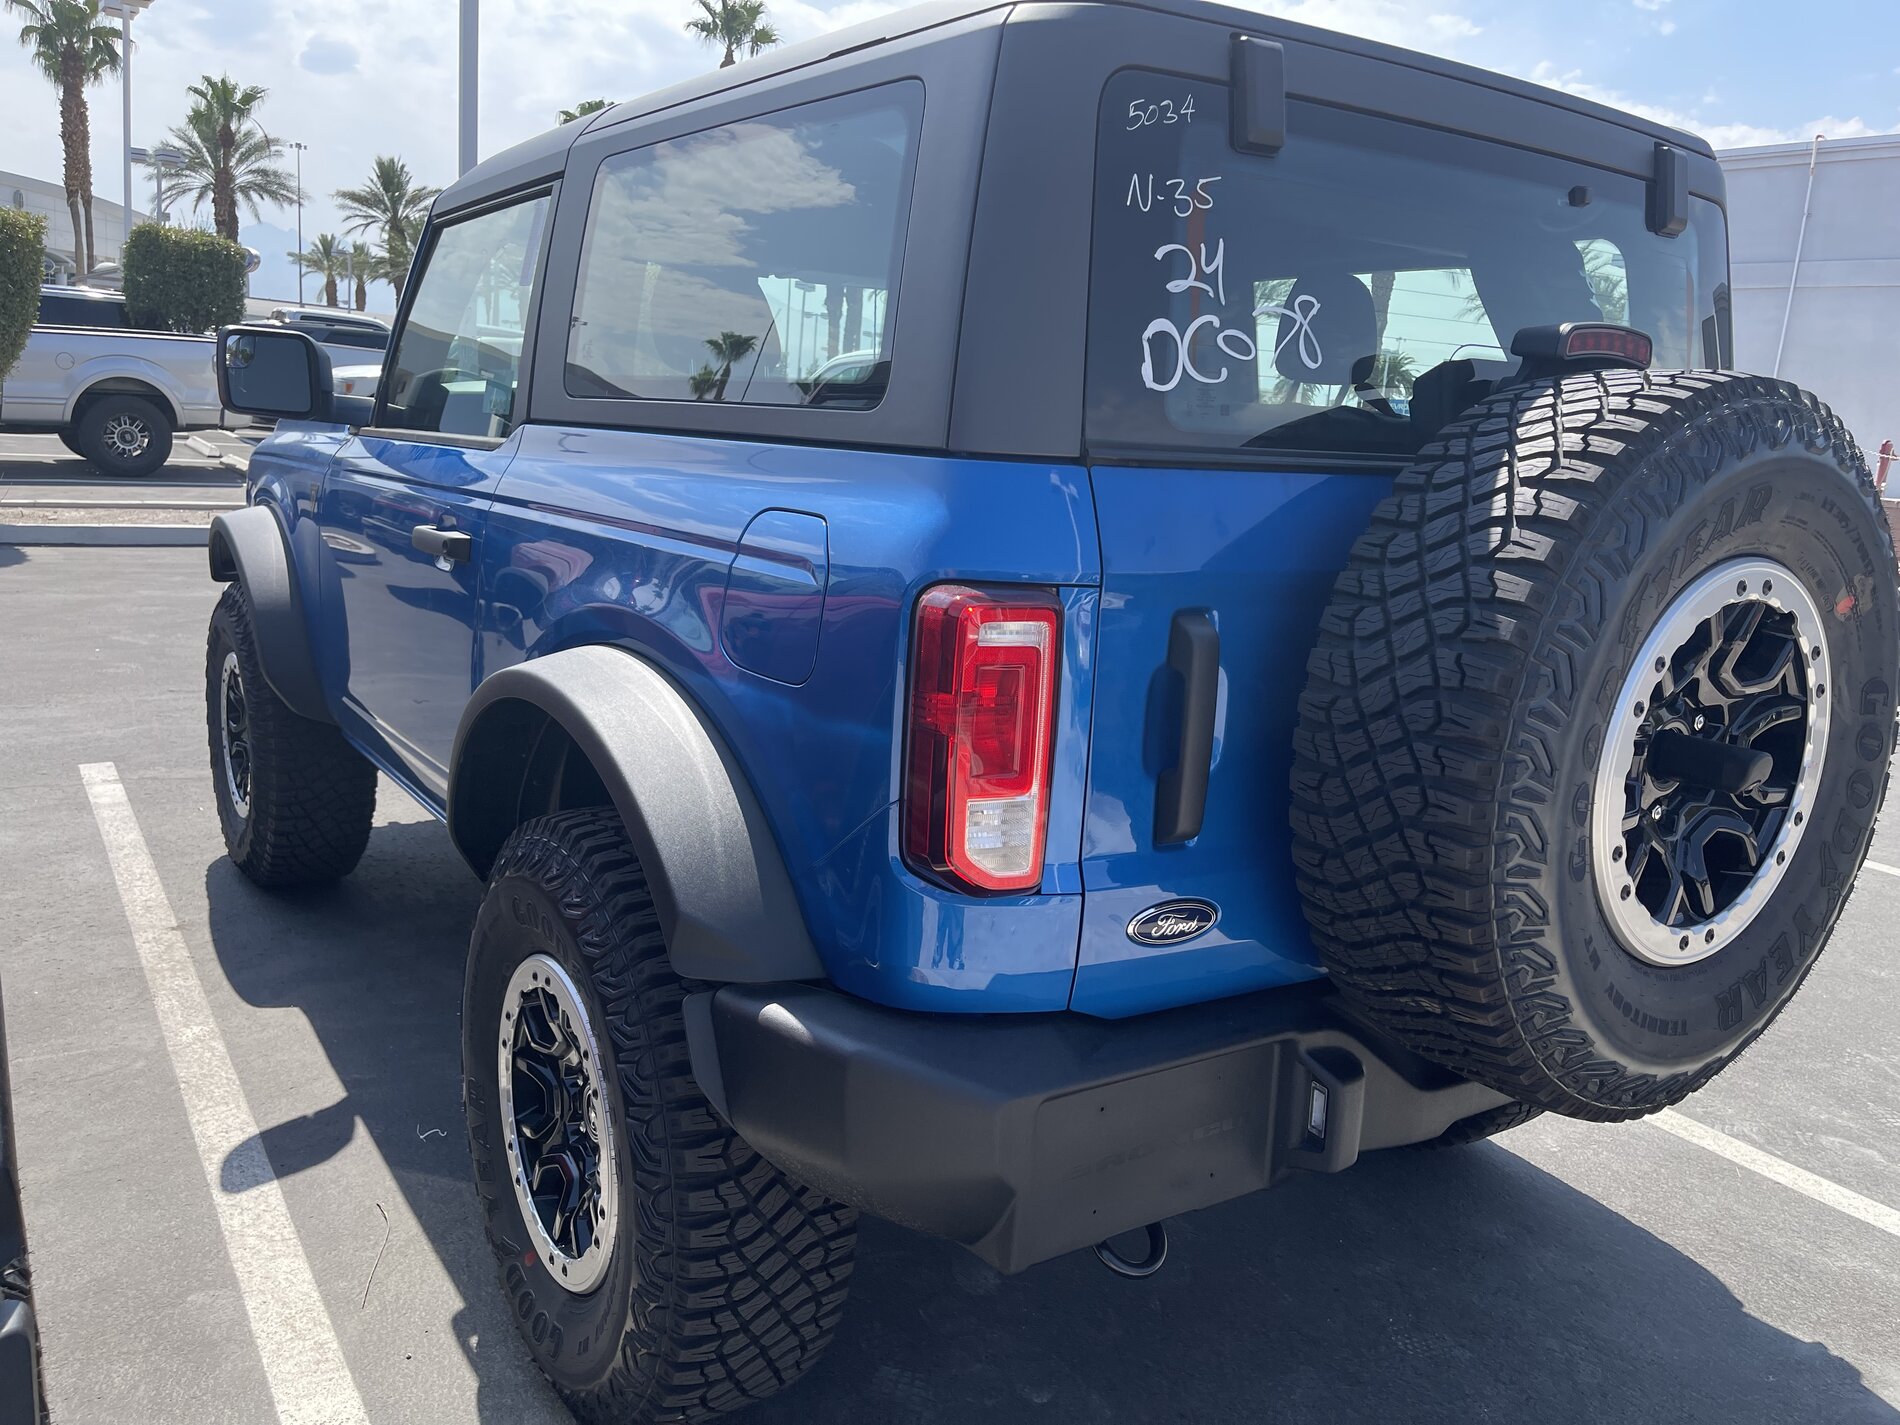 Ford Bronco Bronco spotting at my local dealership. 6A0C083C-4F2A-4251-8926-80D7A2FC9DF0